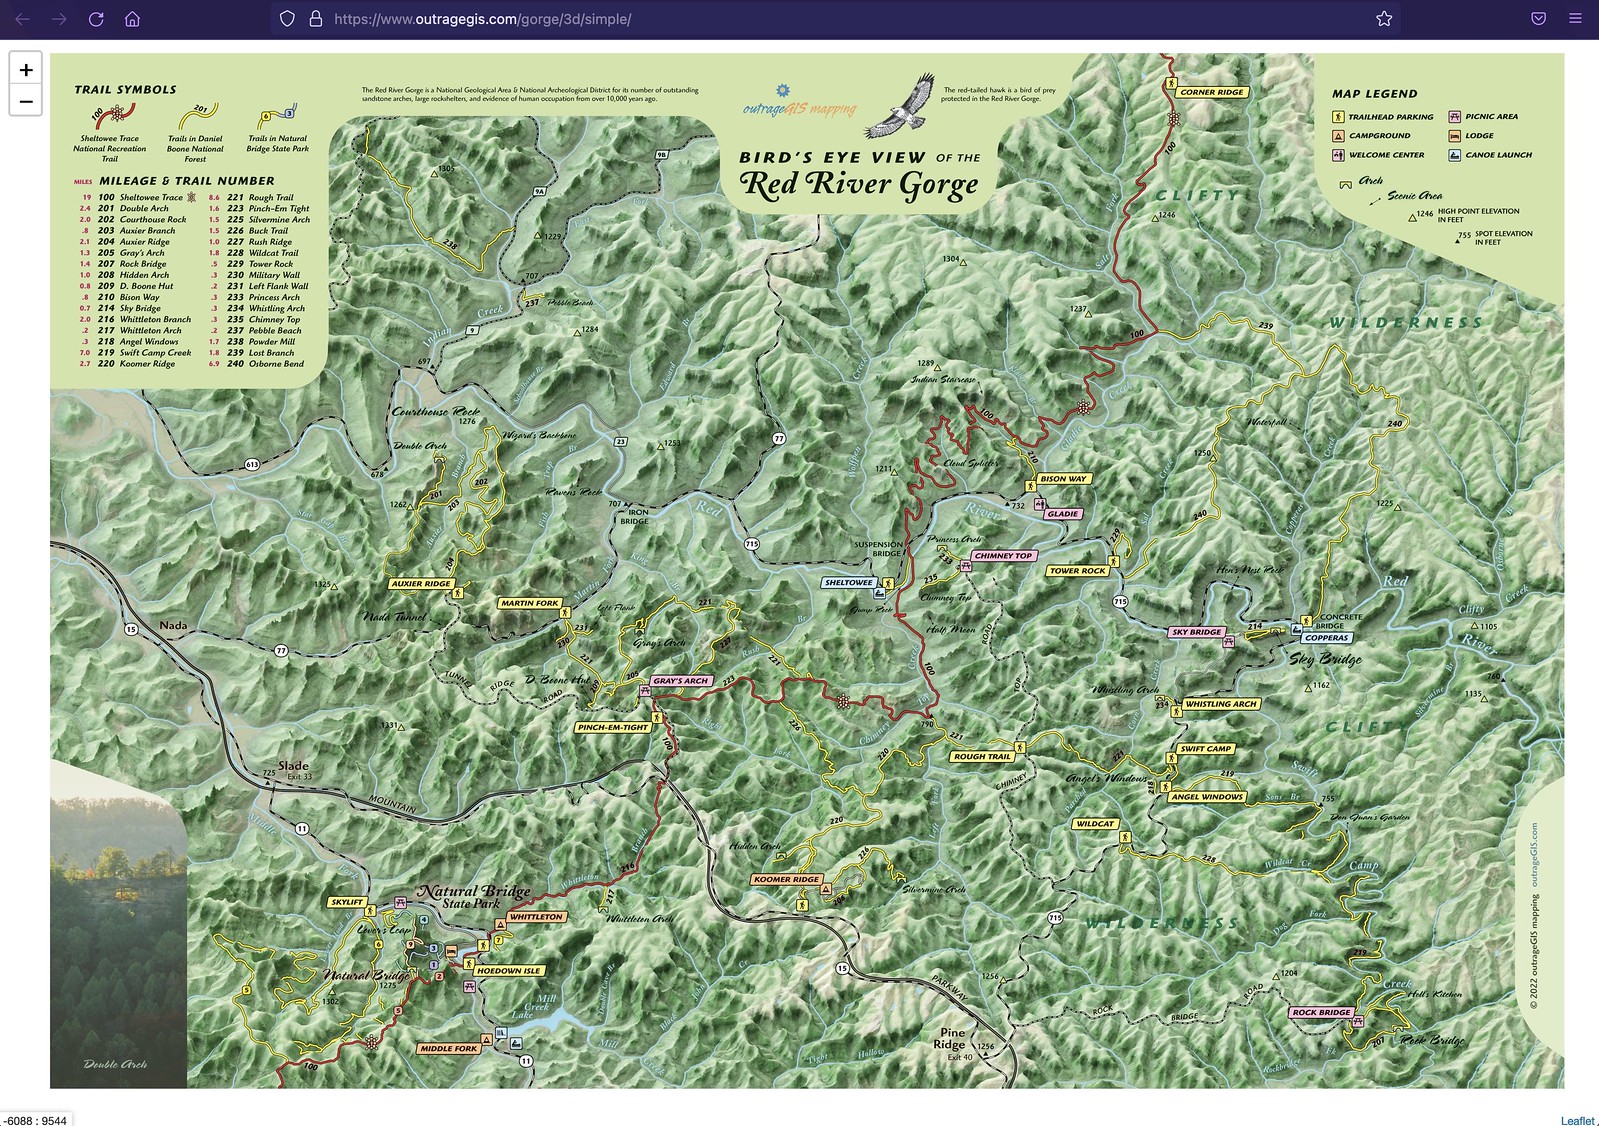 New map in our printed series for the Red River Gorge